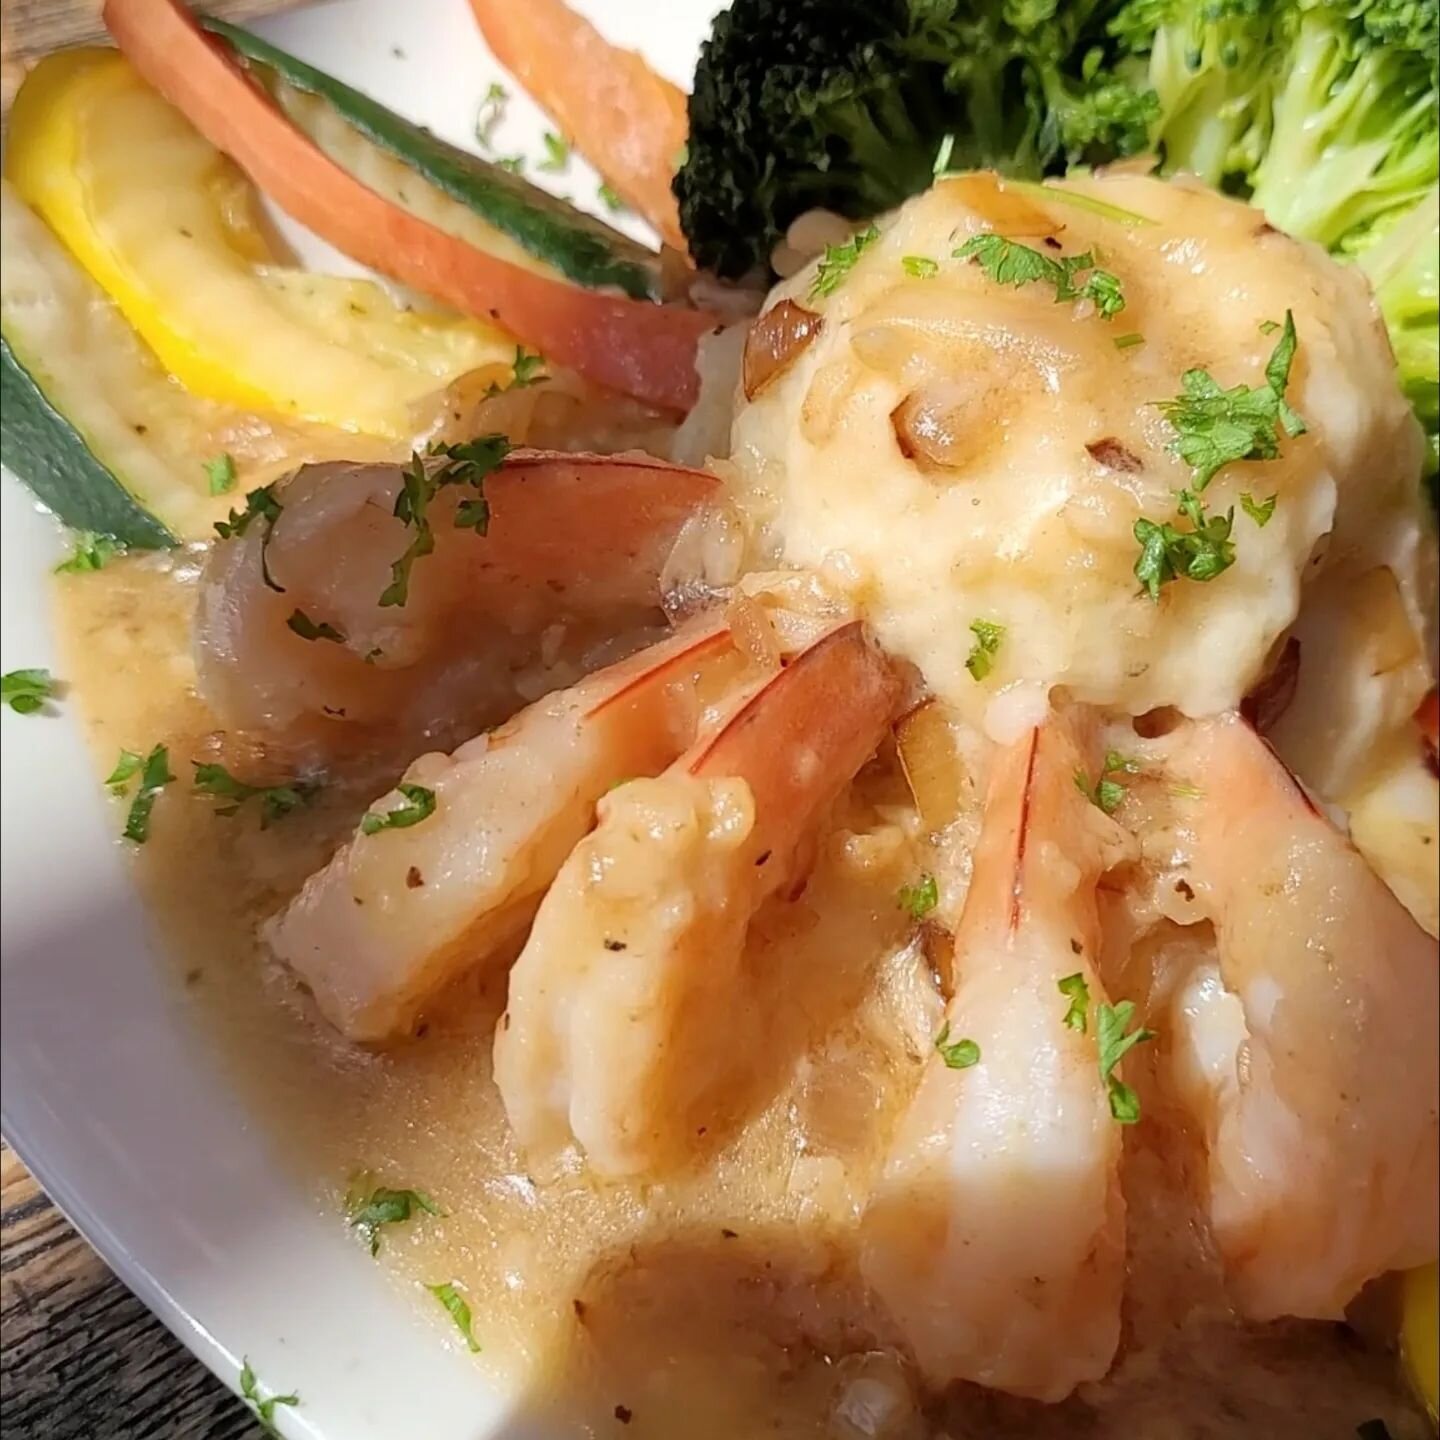 🦐What kind of online videos do shrimp love to watch? Hardcore prawn🤣😁🤣😁🤣

Try 7 Mile's Shirley's Scampi with Garlic Mashed Potatoes and Steamed Veggies...it's shrimply the best!🦐😁❤️